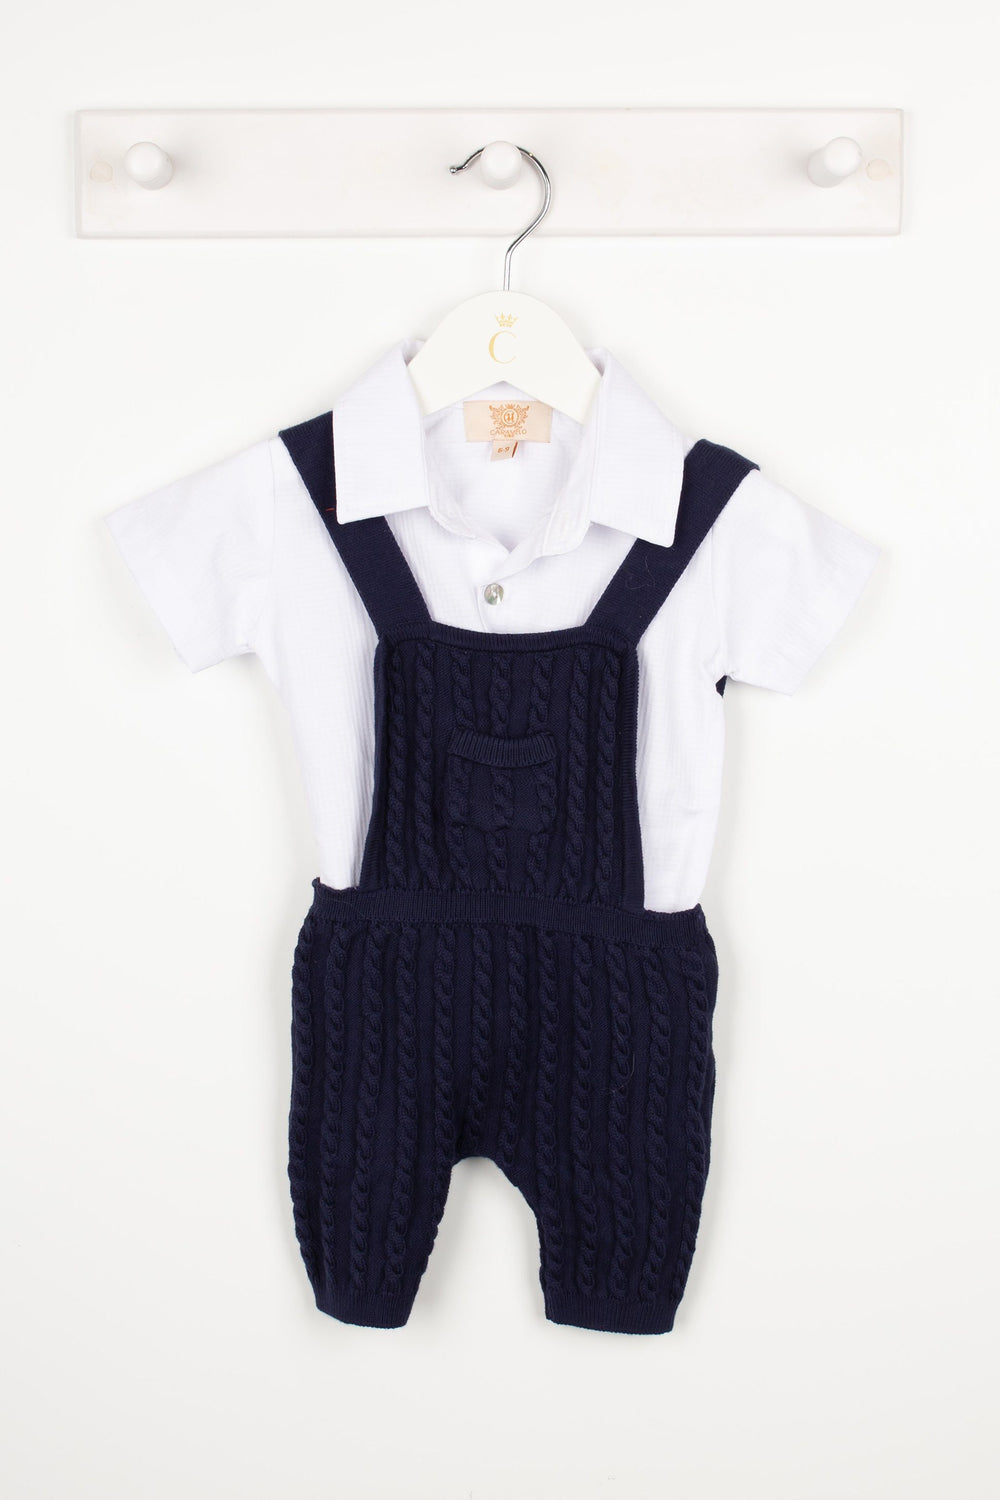 Caramelo Kids "Miles" Navy Cable Knit Dungaree Set | Millie and John